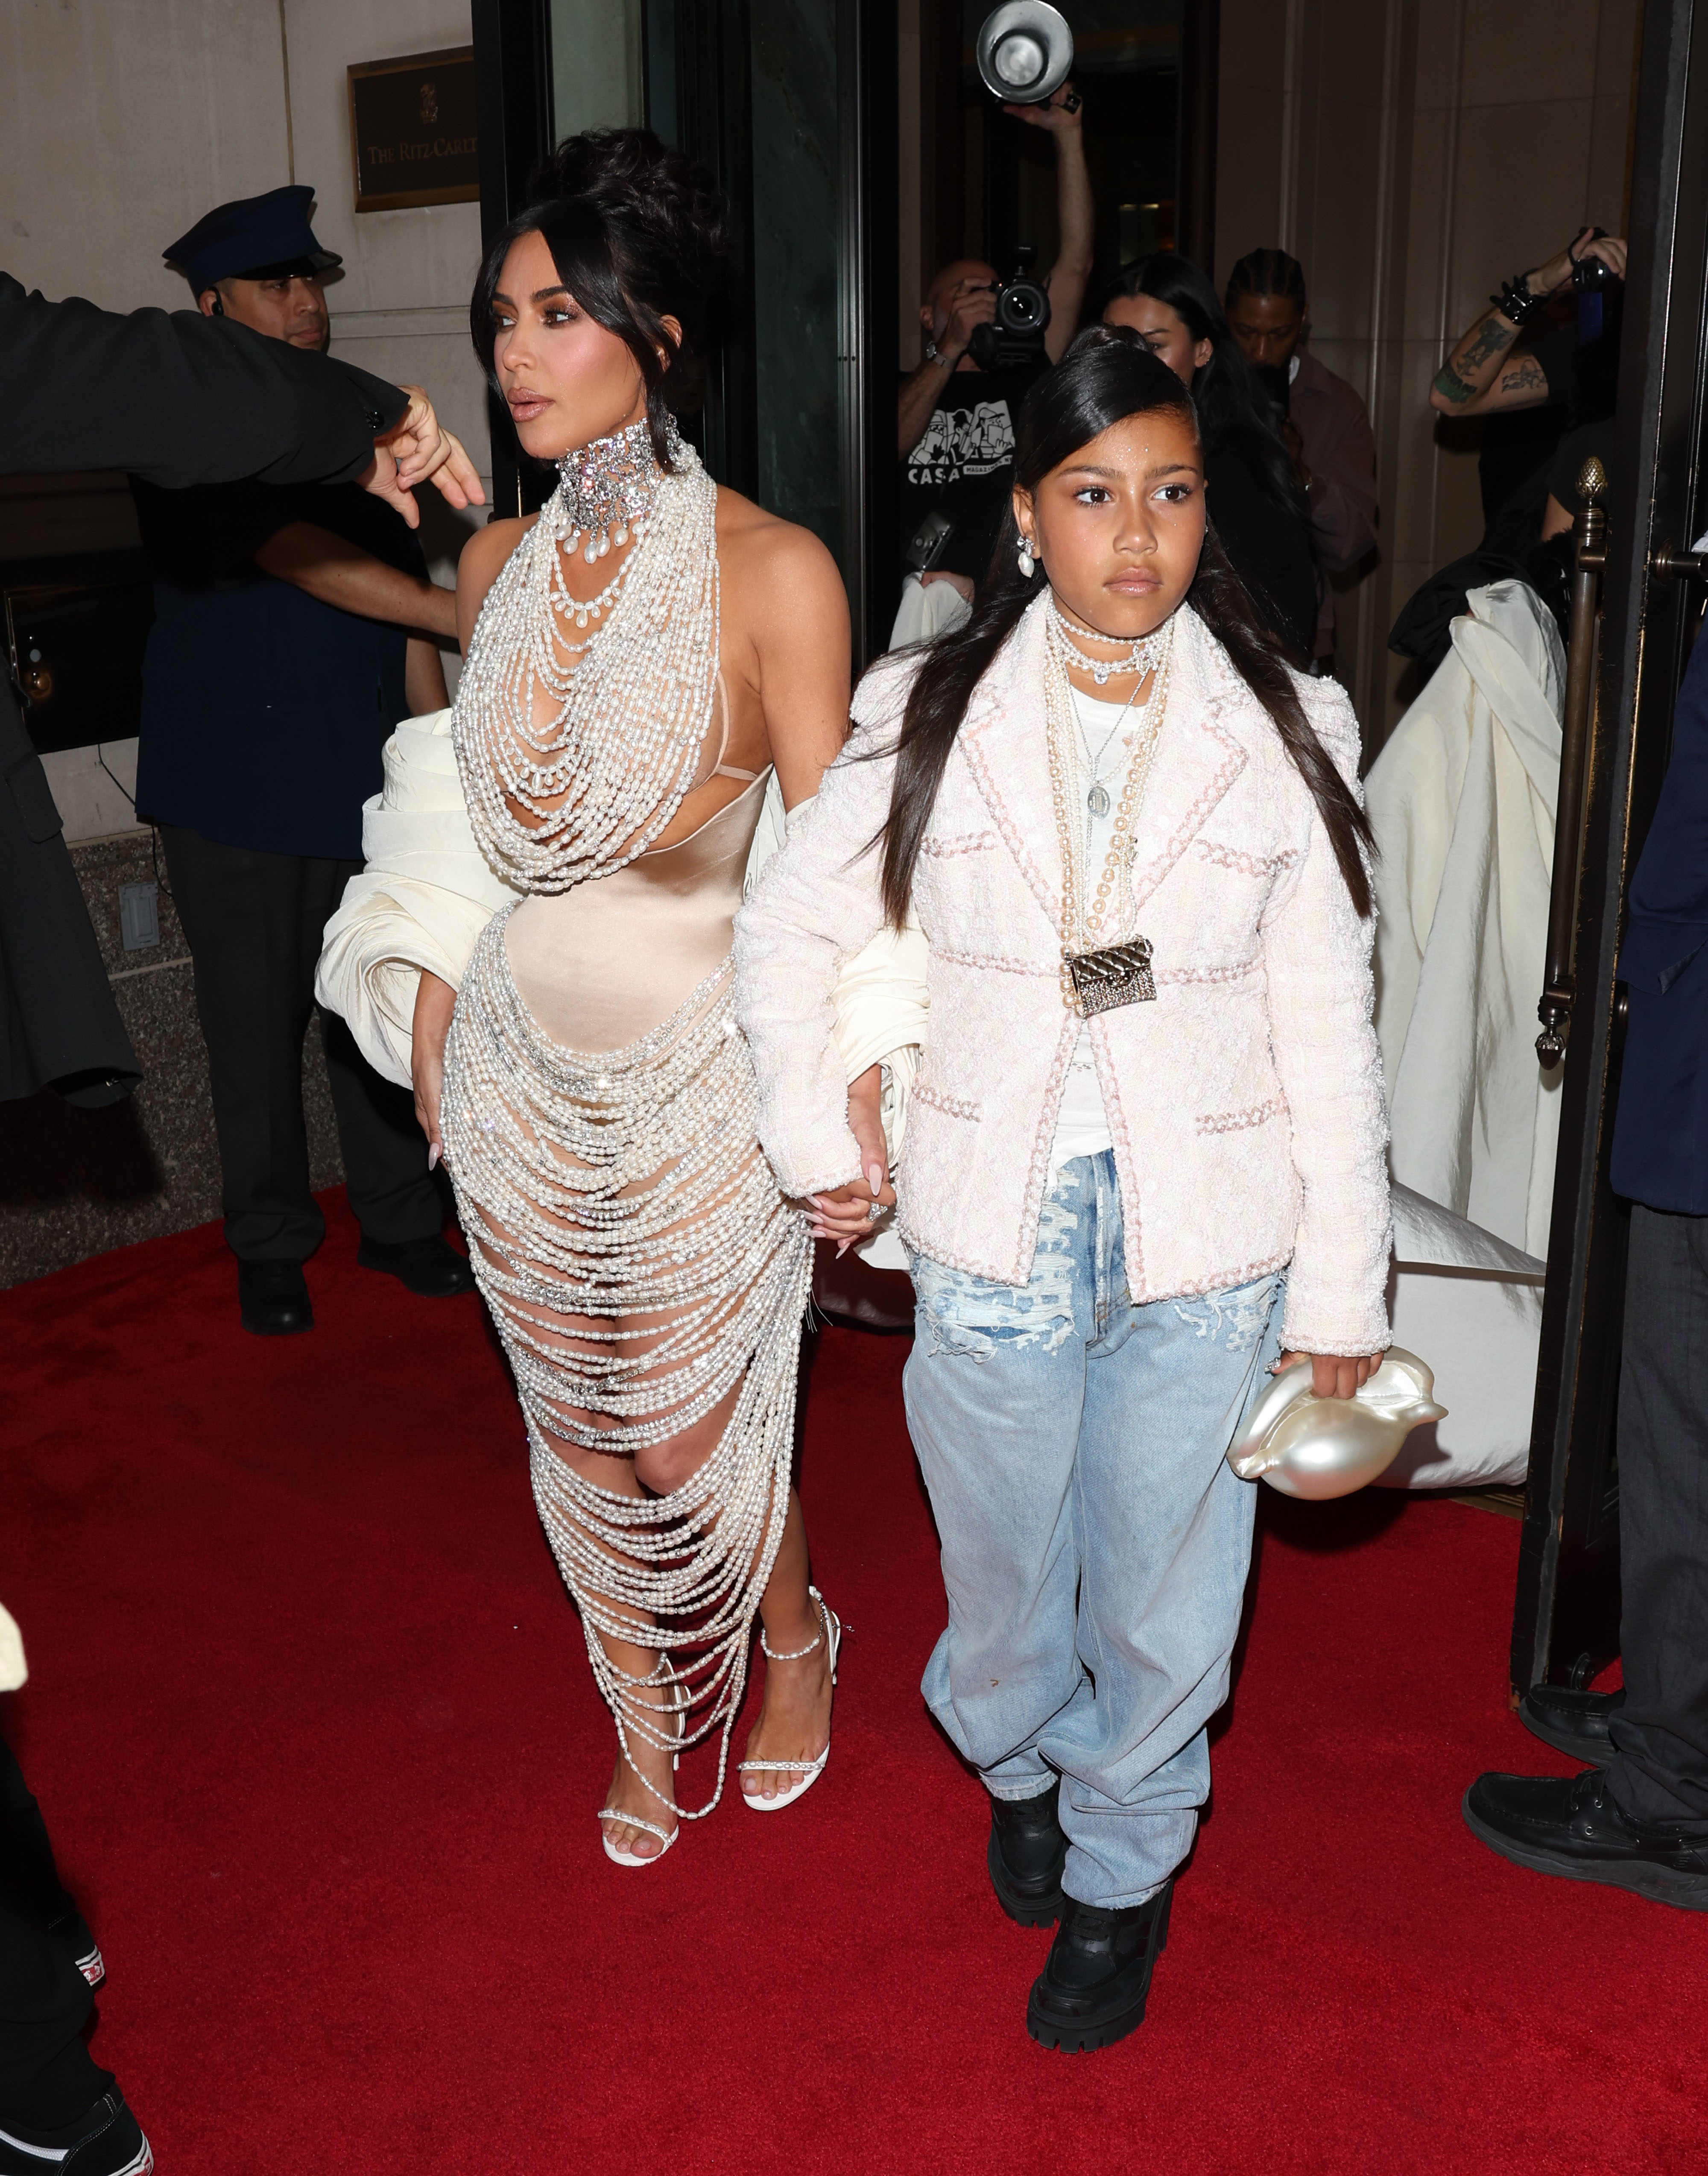 Kim Kardashian in a crystal-adorned sheer gown poses with North West, who is dressed in a pink jacket and jeans